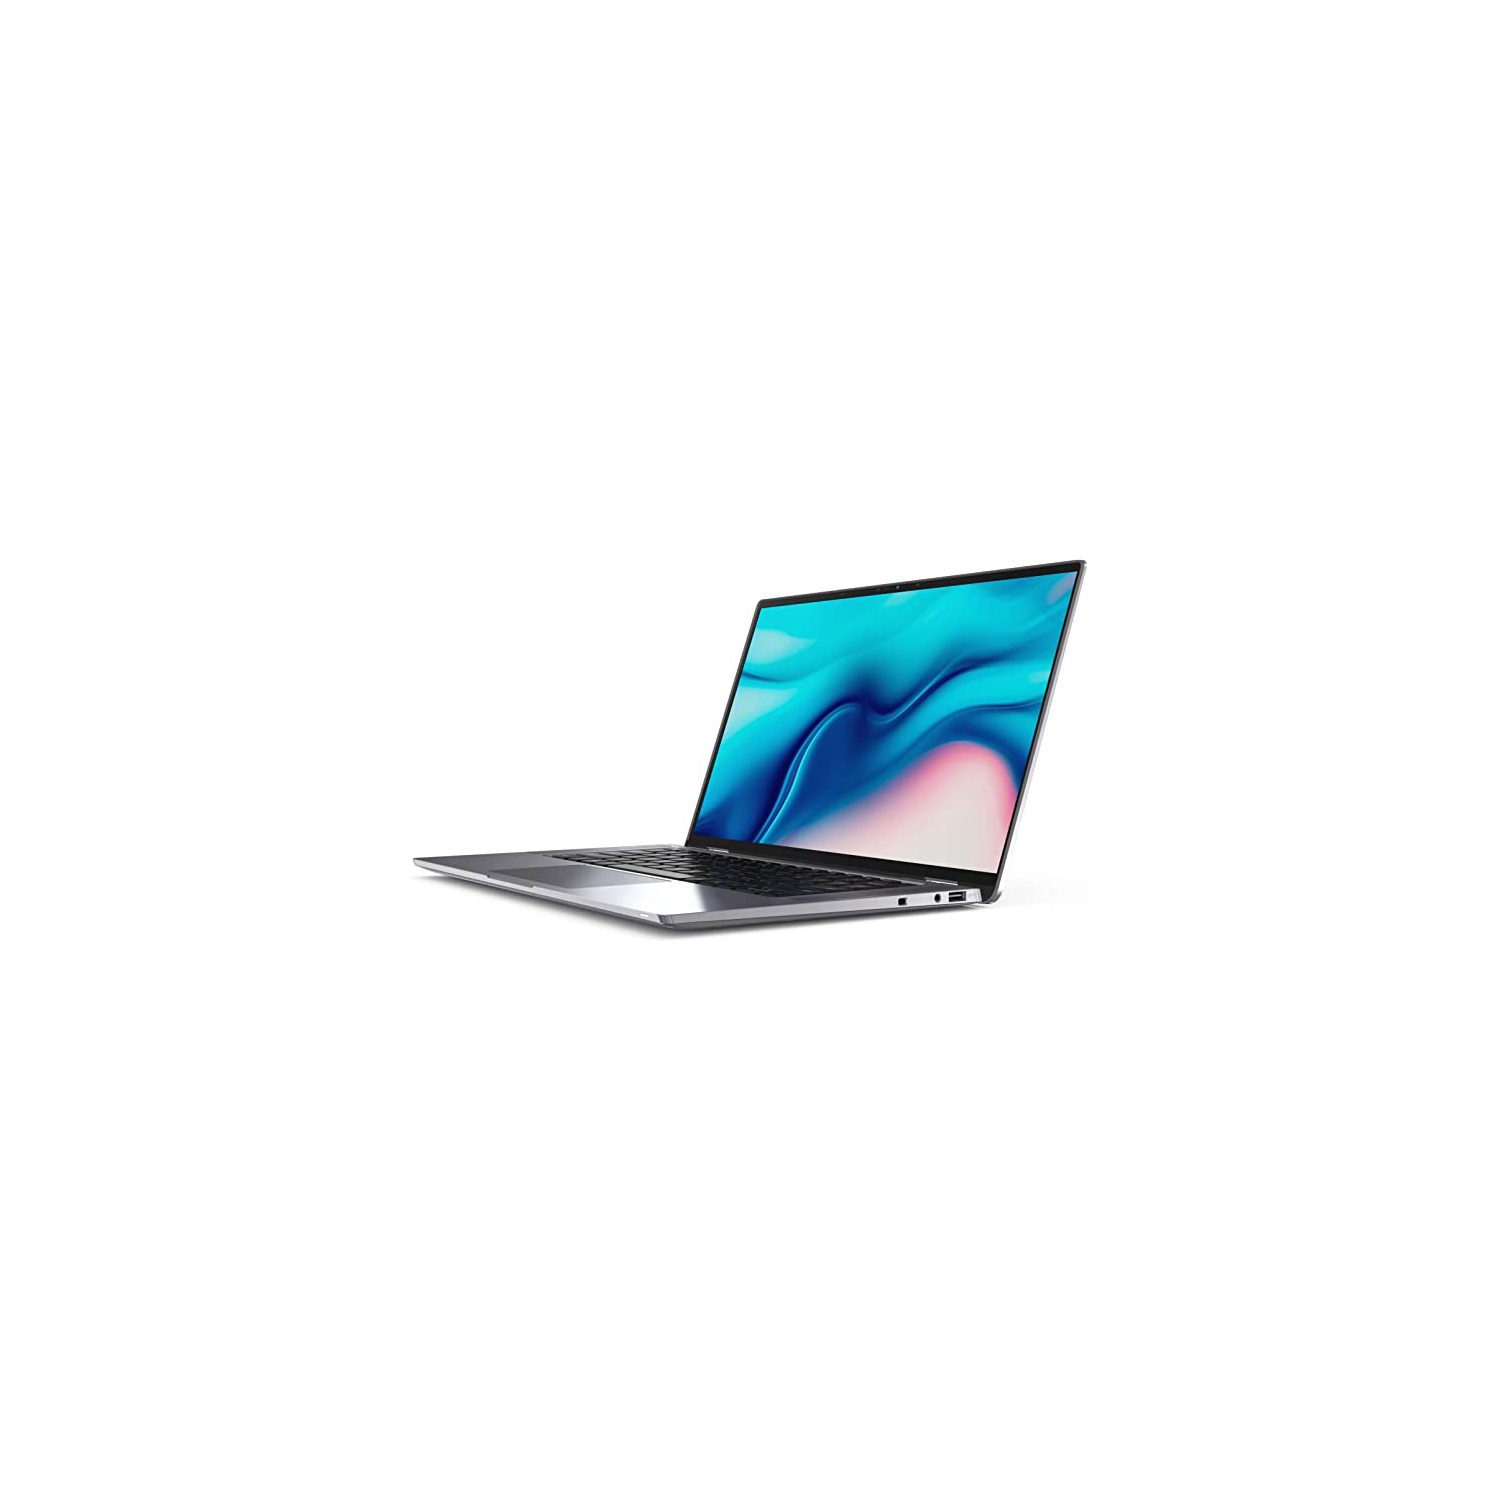 Refurbished (Excellent) - Dell Latitude 9000 9510 Laptop (2020) | 15.6" FHD | Core i7 - 256GB SSD - 16GB RAM | 6 Cores @ 4.7 GHz - 10th Gen CPU Certified Refurbished